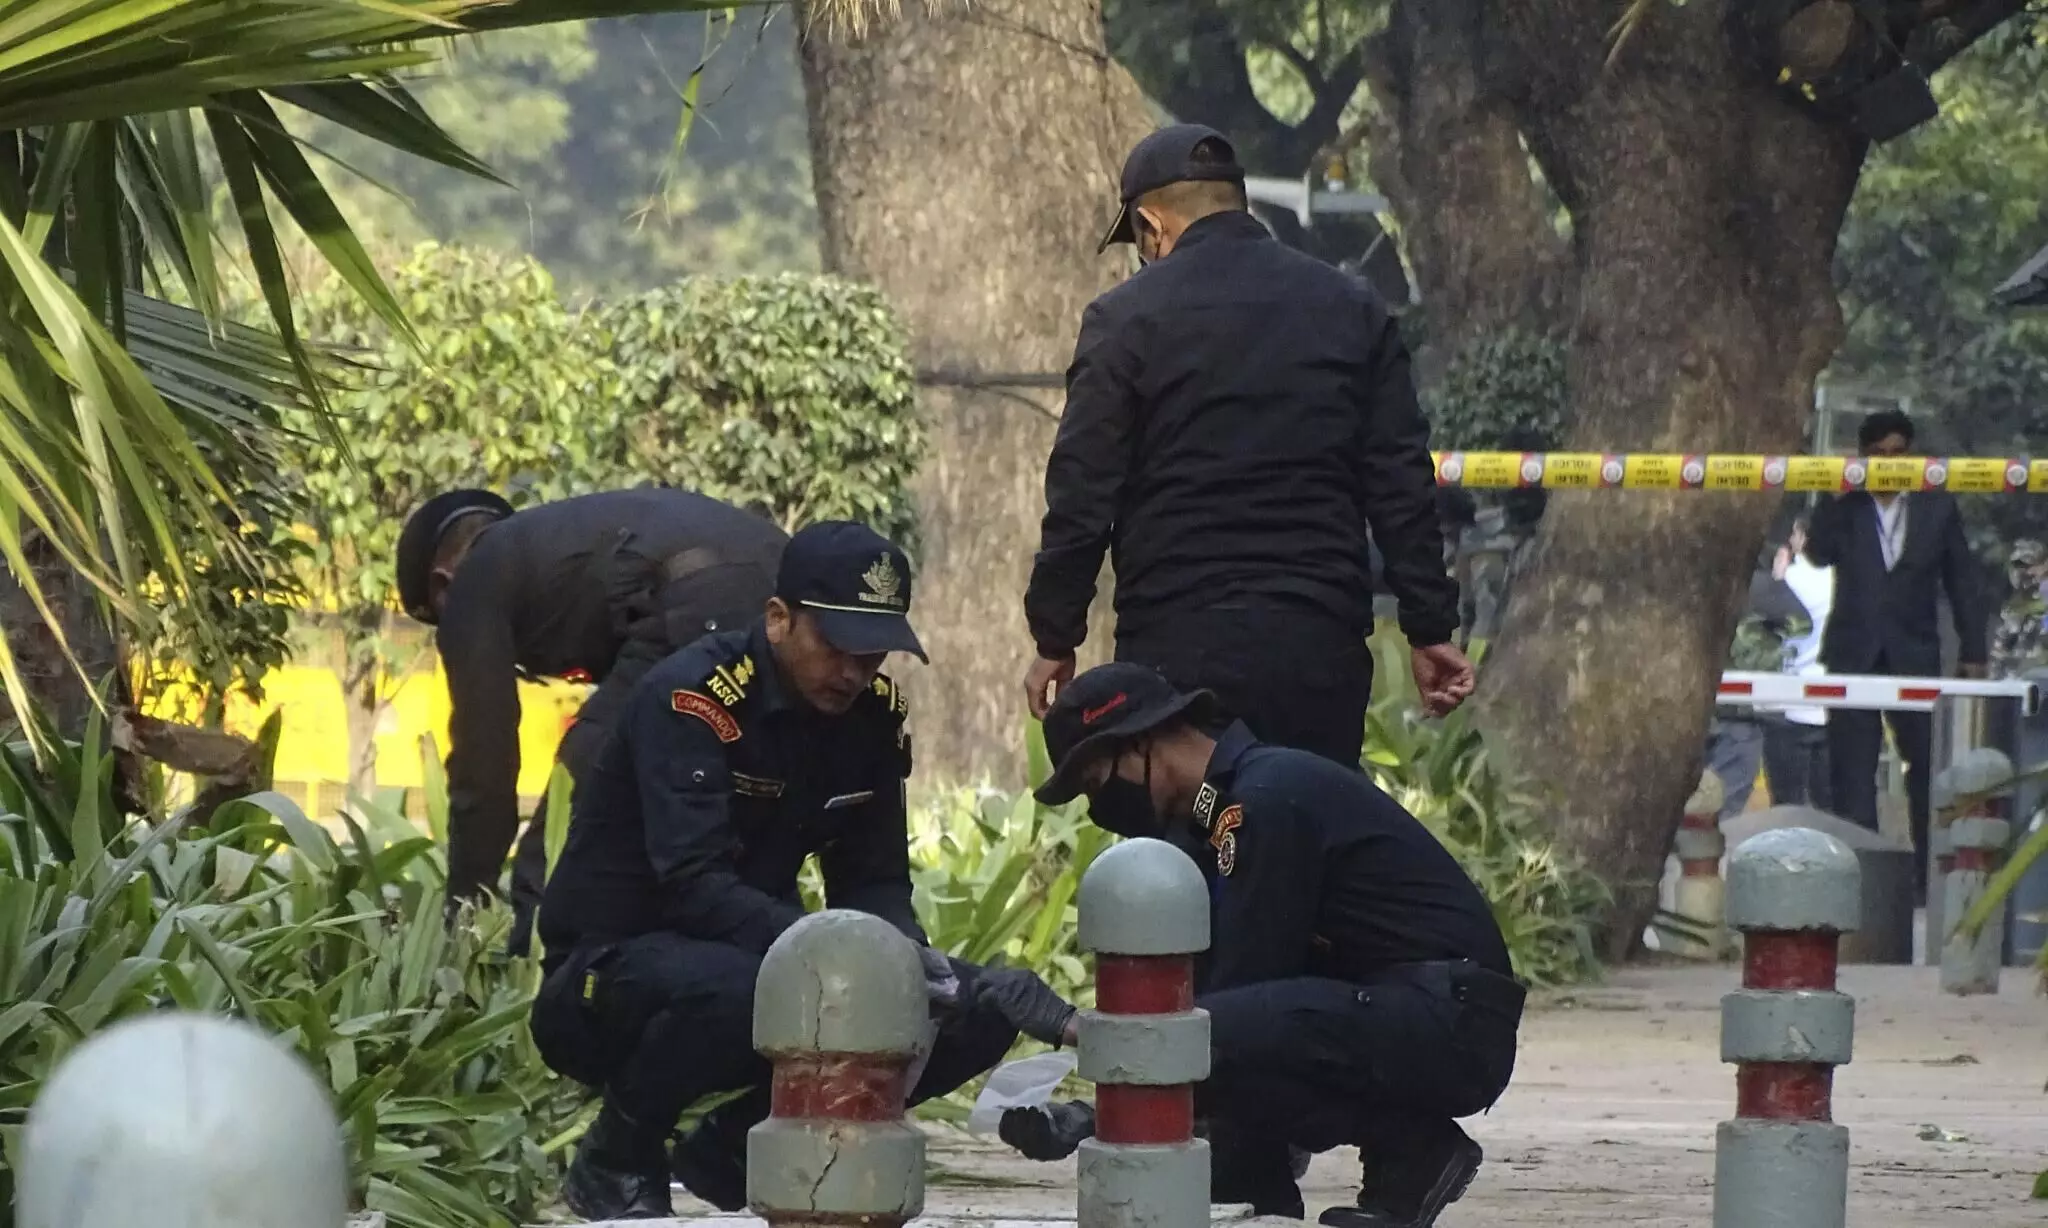 Embassy blast: Police claim suspect from Jamia visited 2 hrs ahead